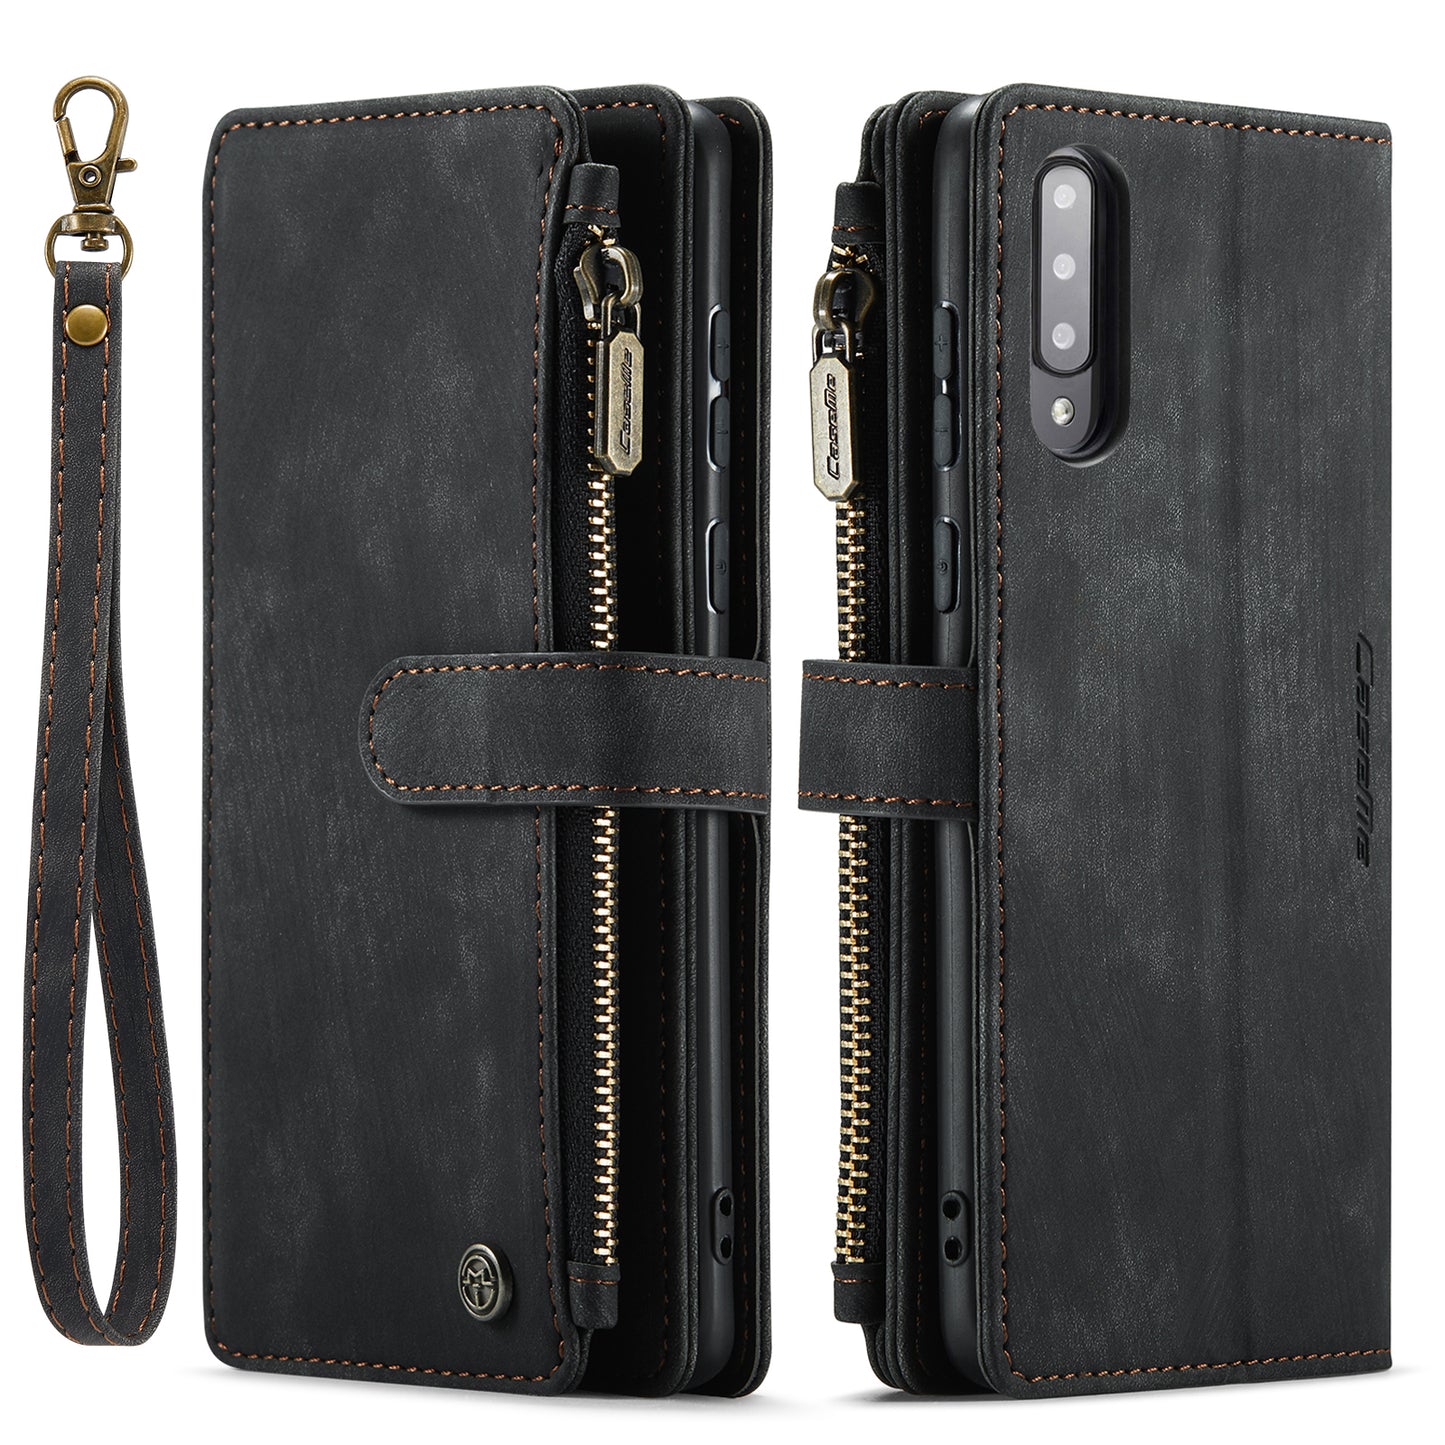 Multi-card Zipper Galaxy A30s Leather Case Double Fold Stand with Hand Strap